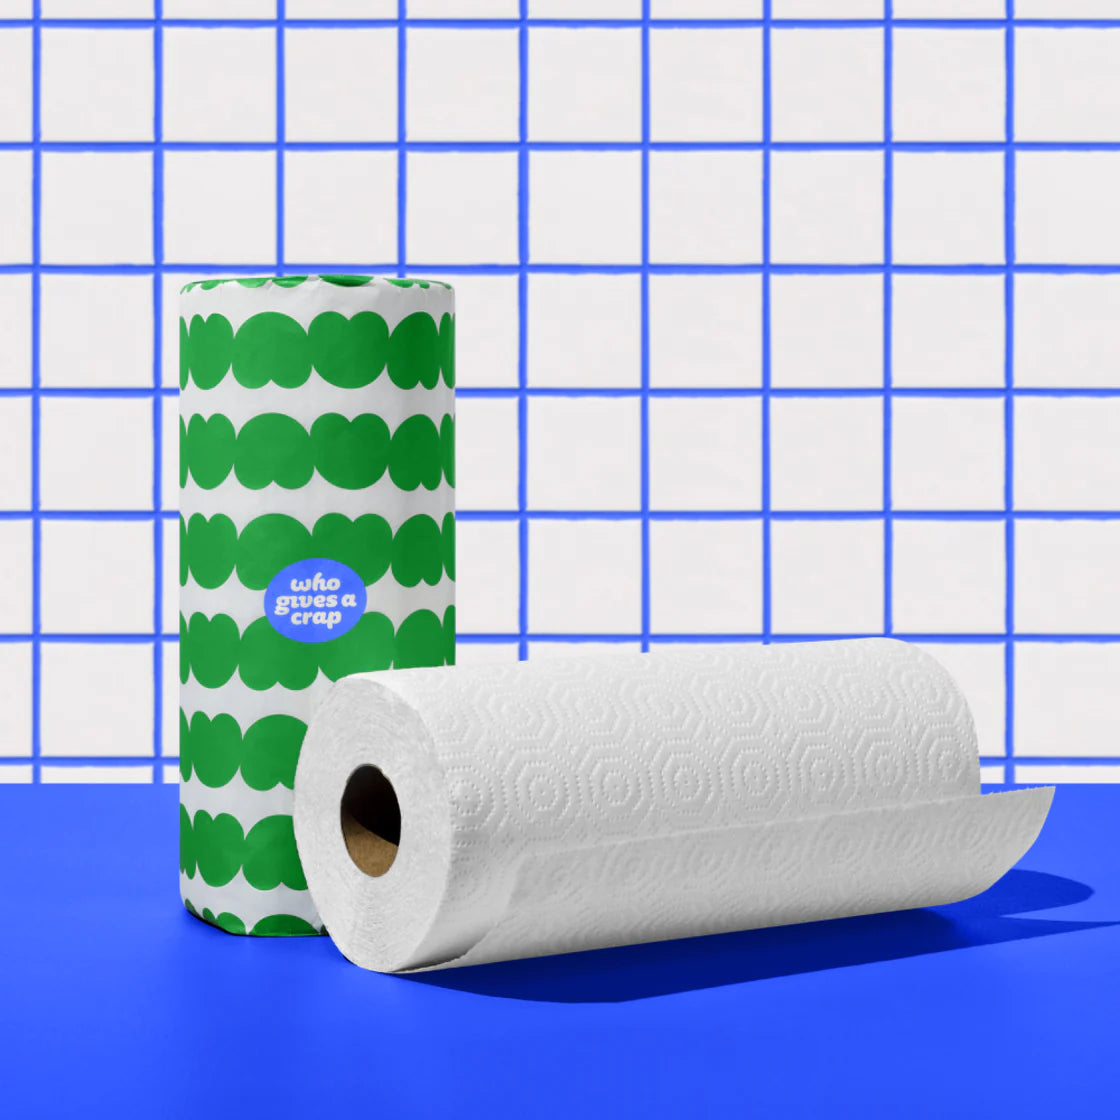 100% Recycled Paper Towels